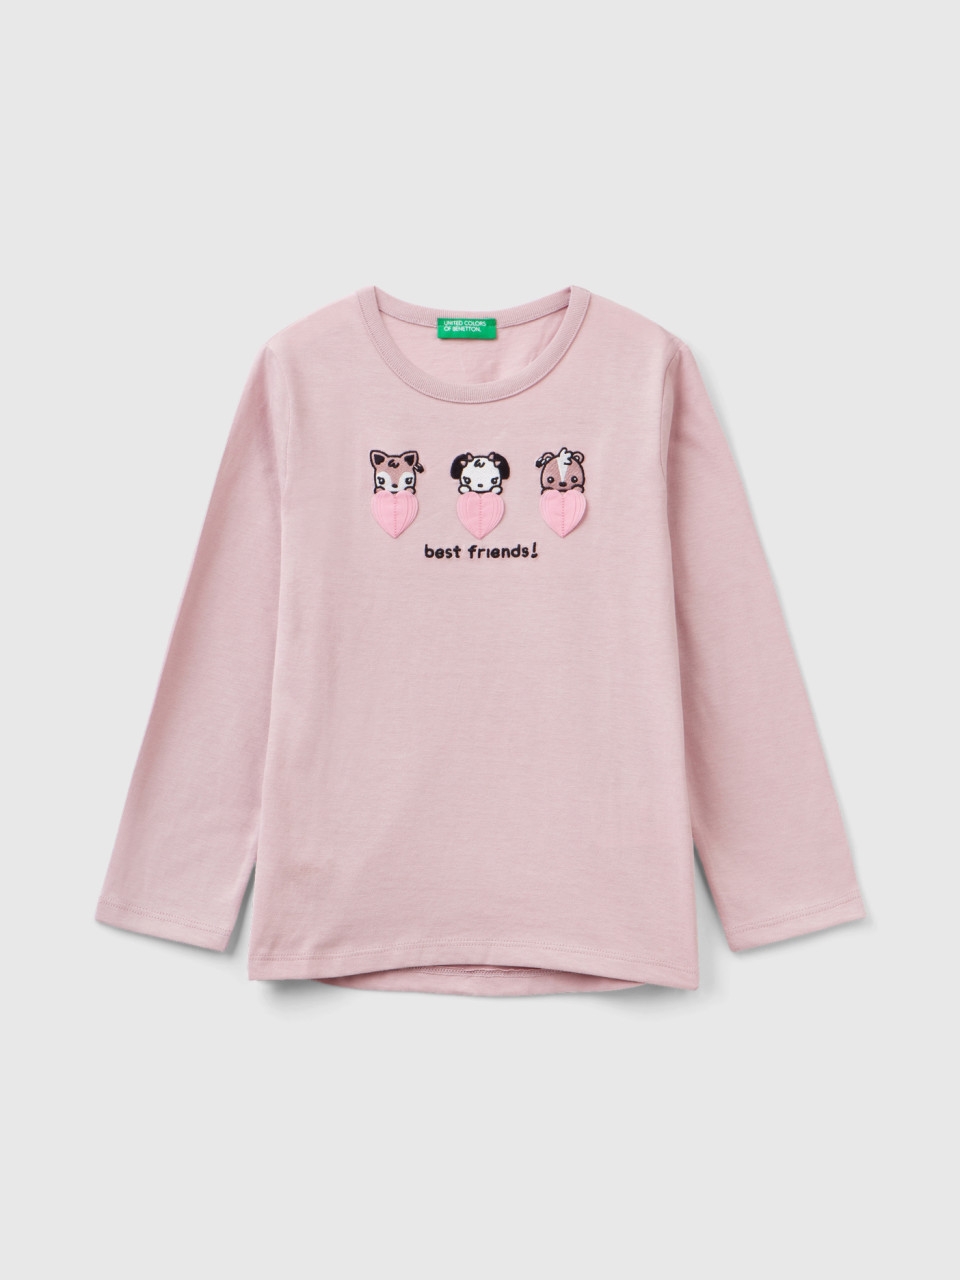 Benetton, T-shirt With Embroidery And Appliques, Pink, Kids